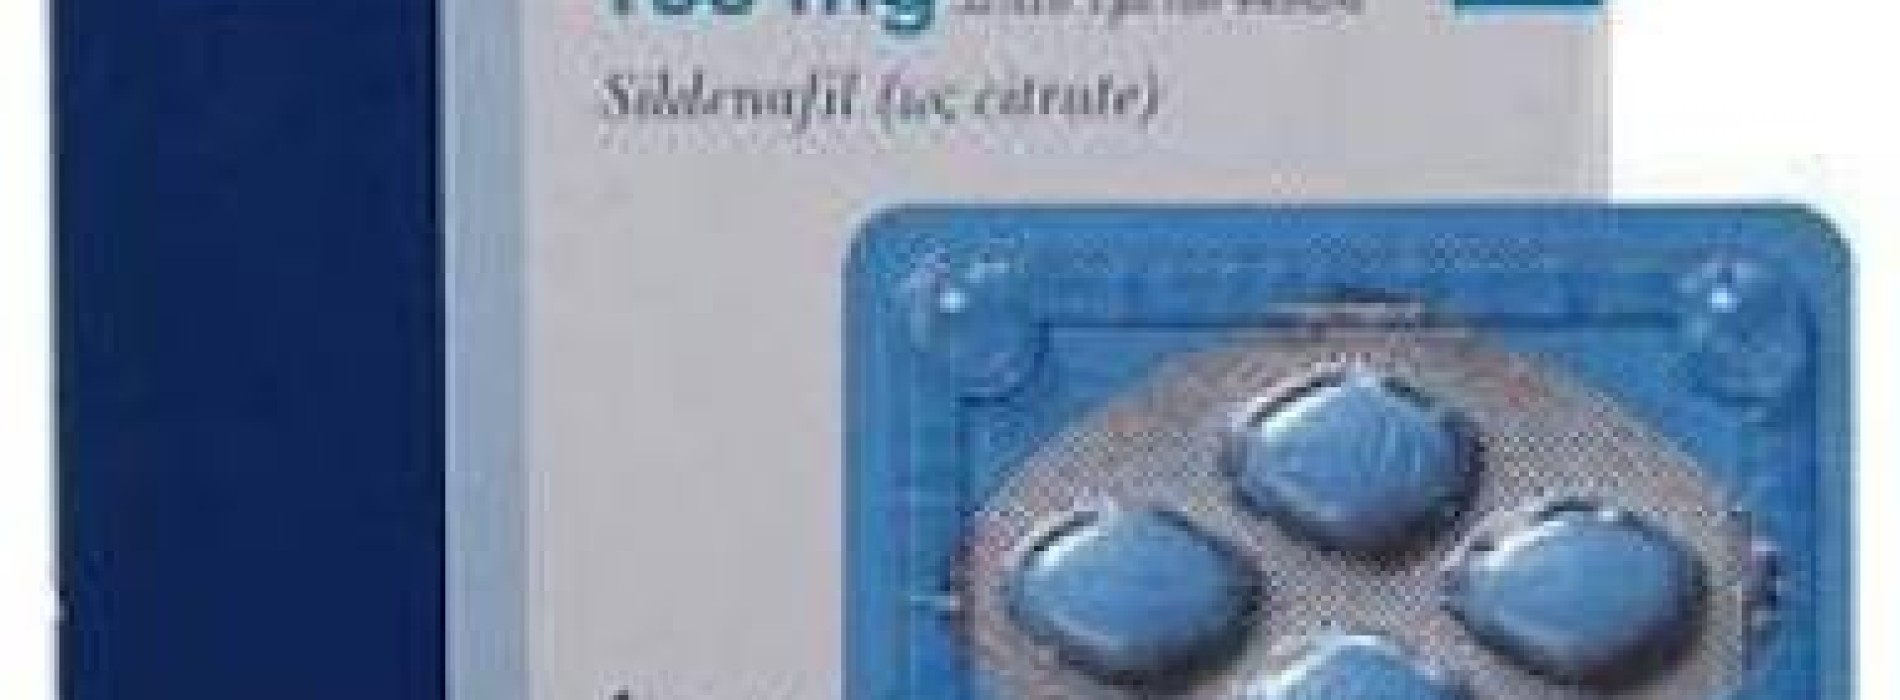 Viagra may benefit patients at risk for diabetes, new study shows